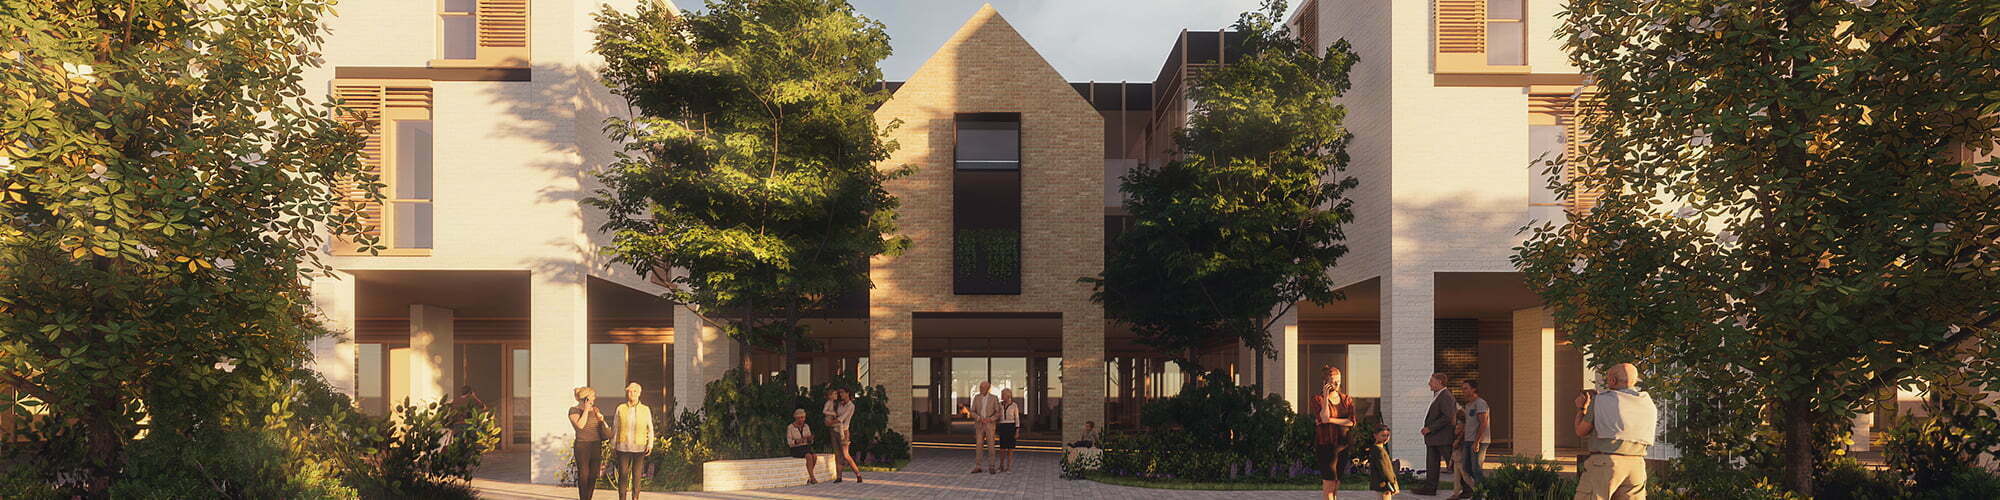 Image for GEORGIOU AWARDED CONTRACT FOR BRIGHTWATER’S NEW INGLEWOOD DEVELOPMENT